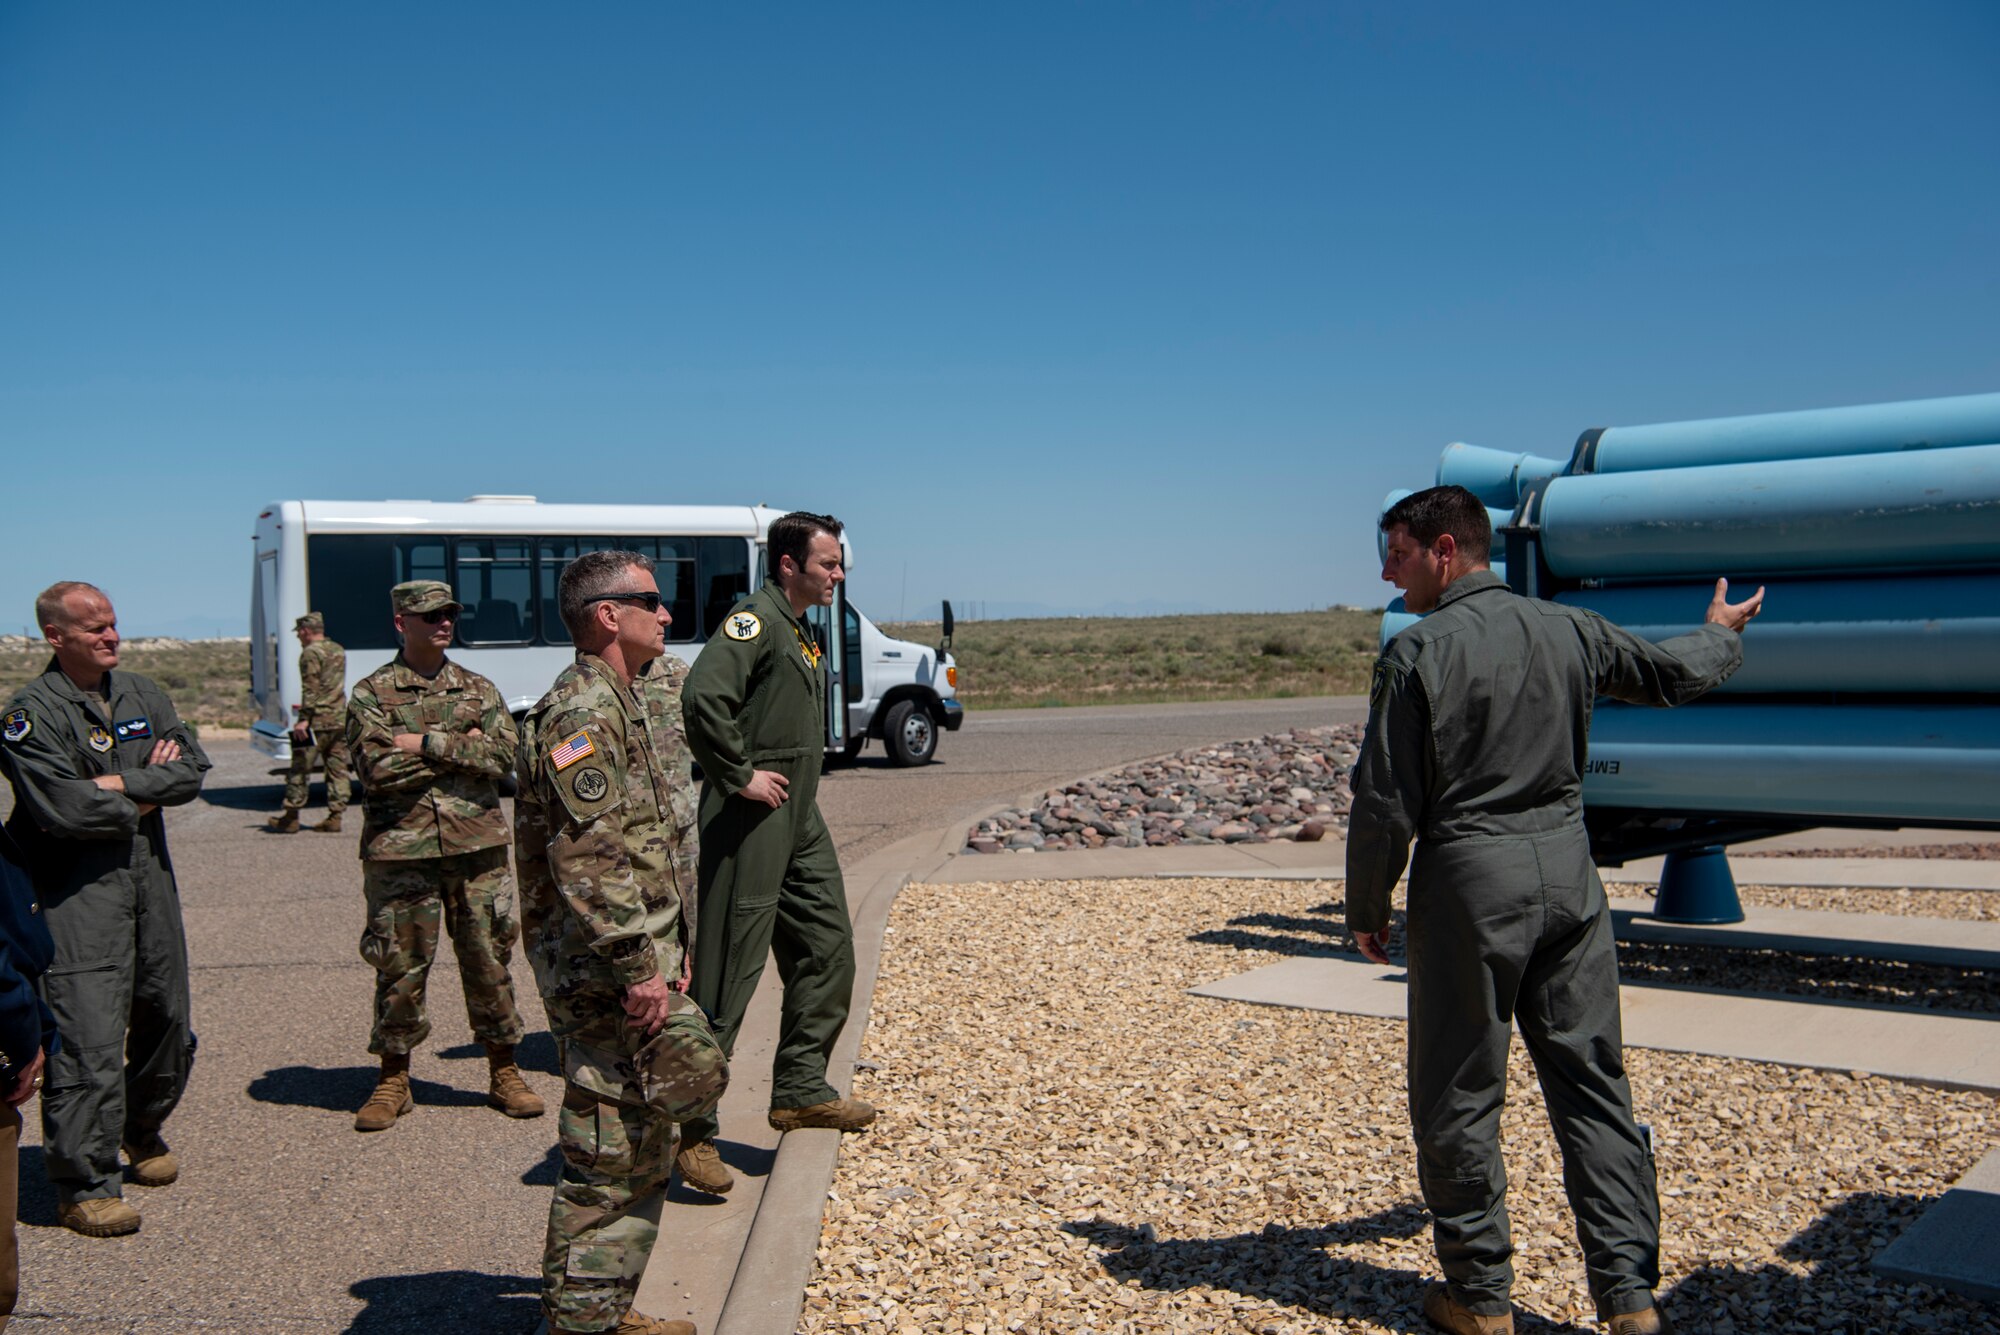 U.S. Army Brig. Gen. Eric Little, White Sands Missile Range commander, visits the 704th Test Group test track sled park, July 9, 2021, on Holloman Air Force Base, New Mexico. Little visited Holloman AFB to familiarize with local operations and tour partner units. (U.S. Air Force photo by Airman 1st Class Jessica Sanchez)